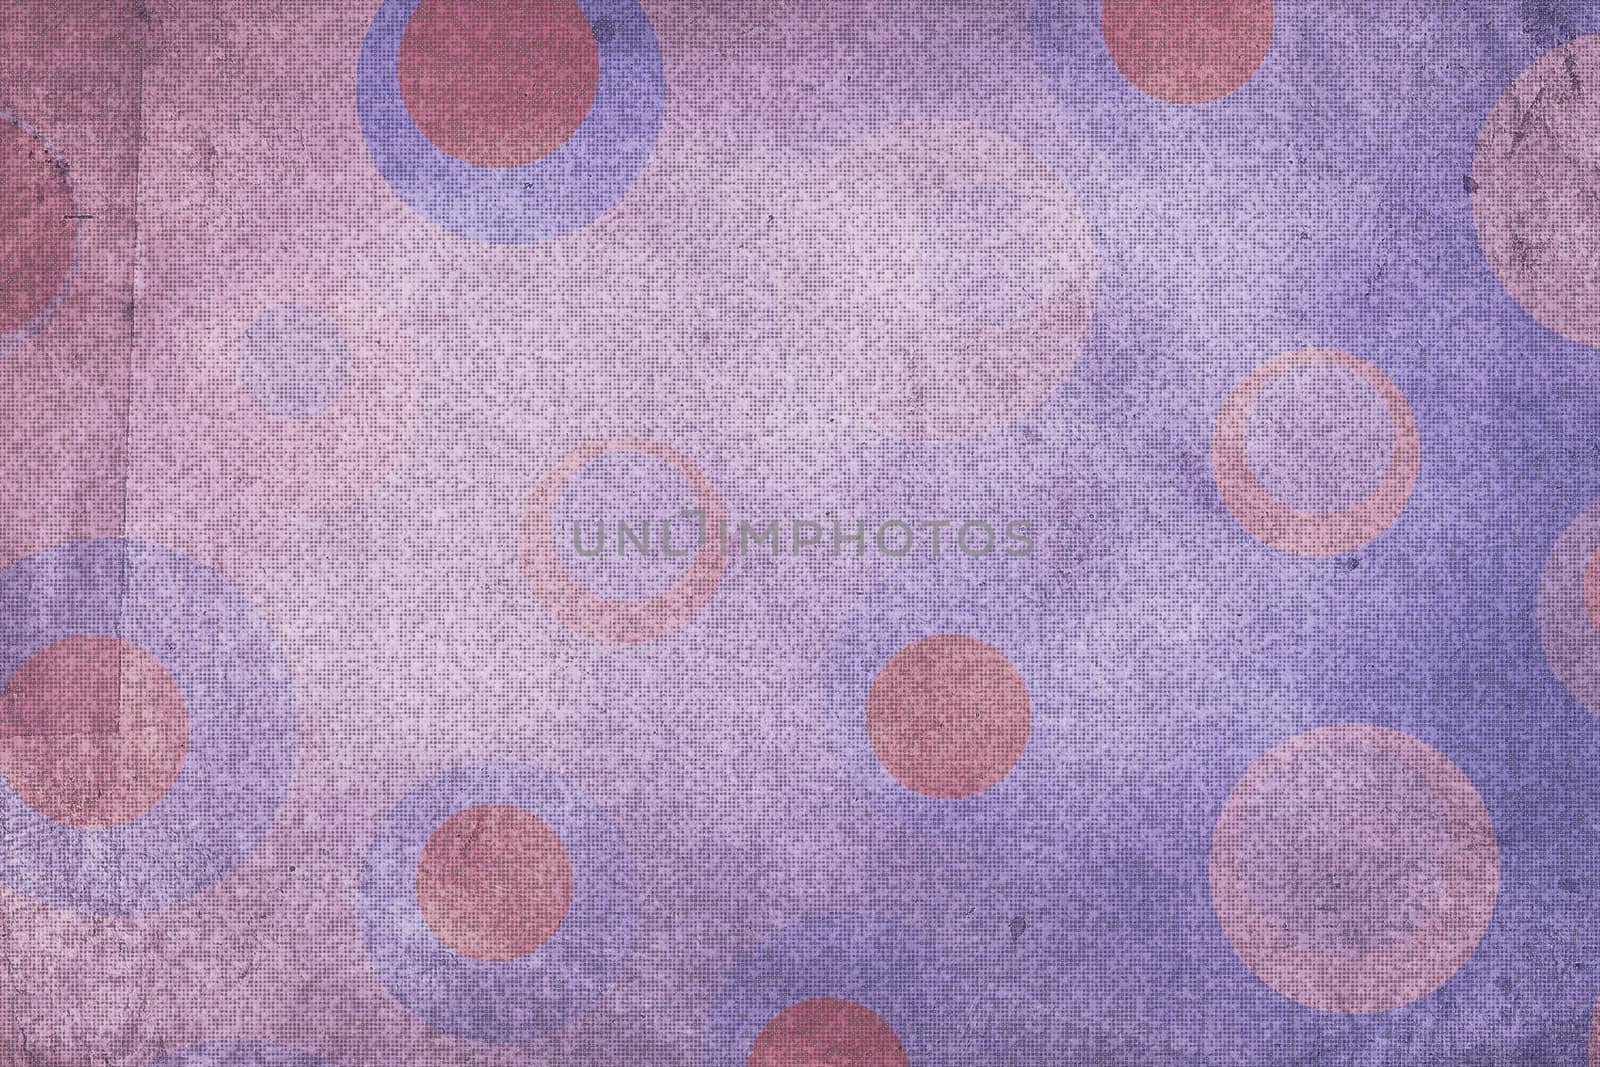 Texture background made of  pink and blue dots, or circles